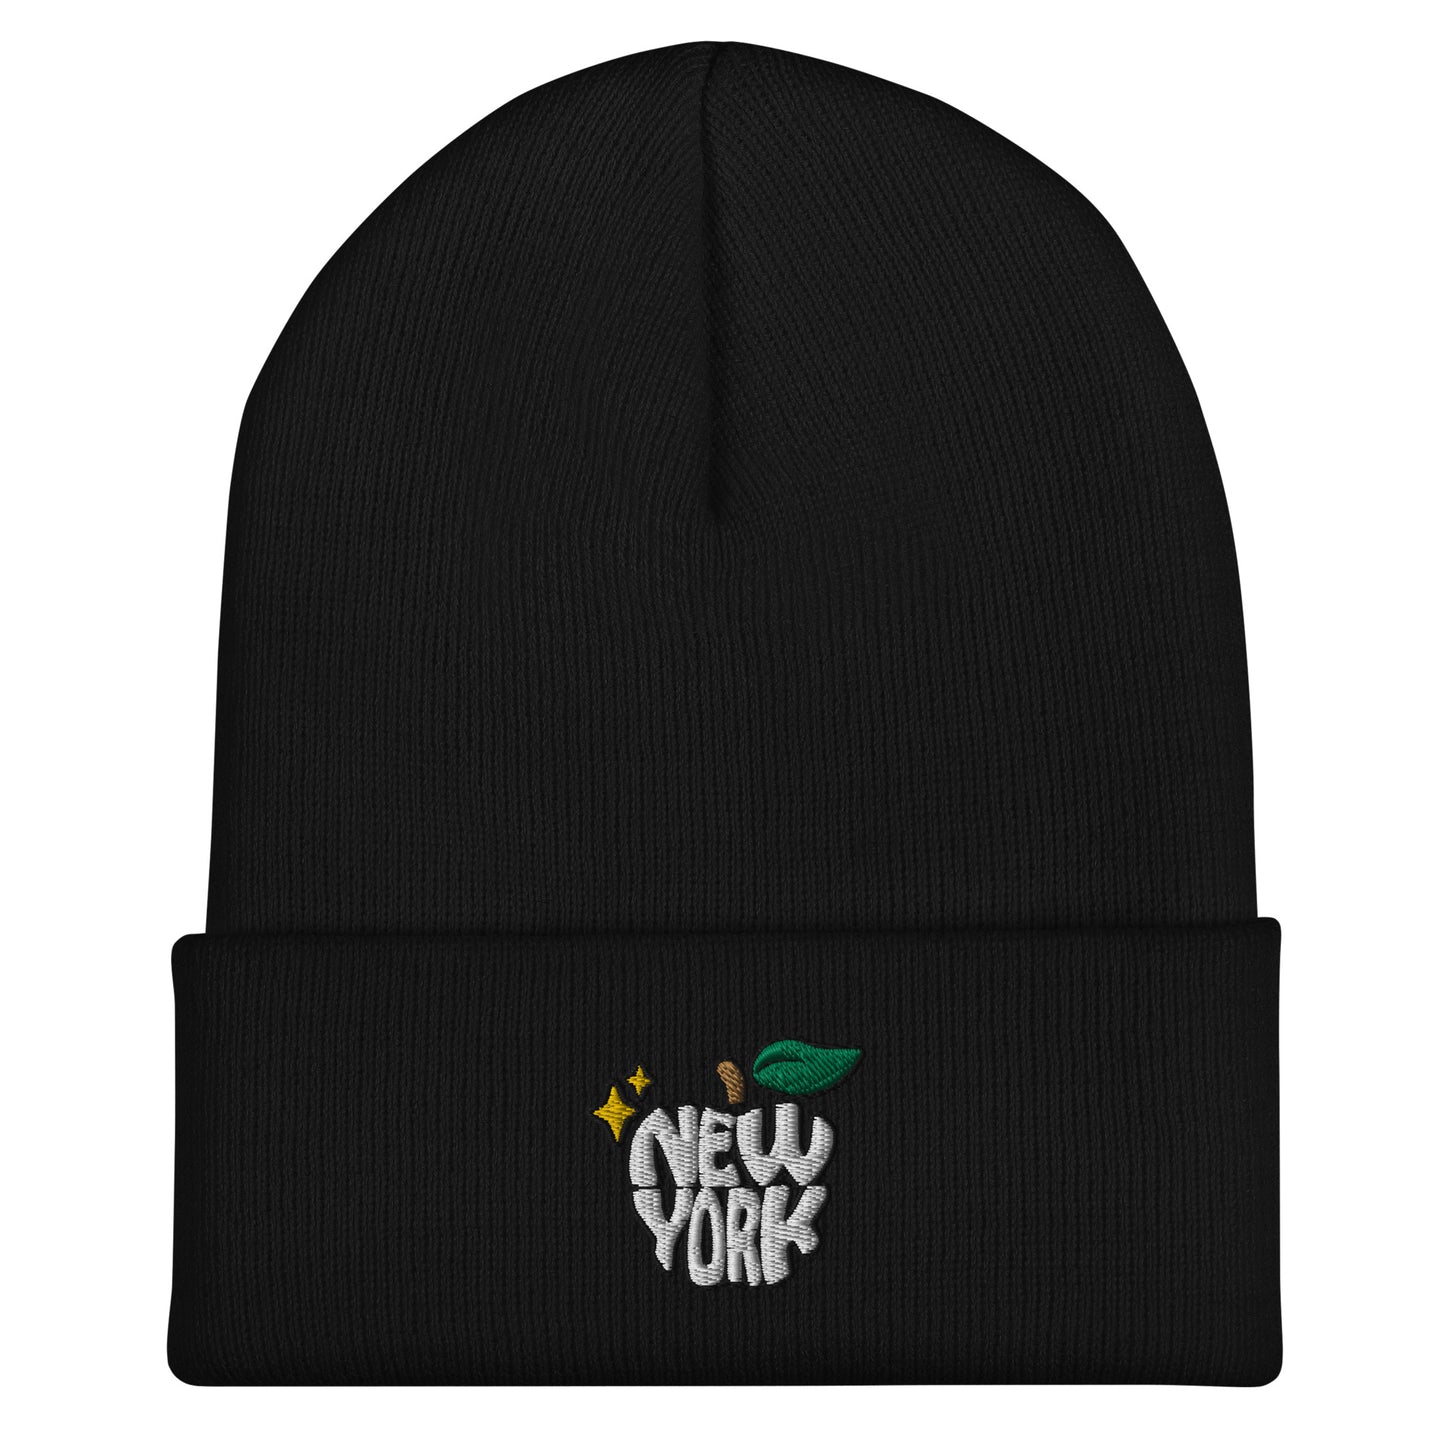 New York Apple Logo Embroidered Black Cuffed Beanie Hat Scattered Streetwear